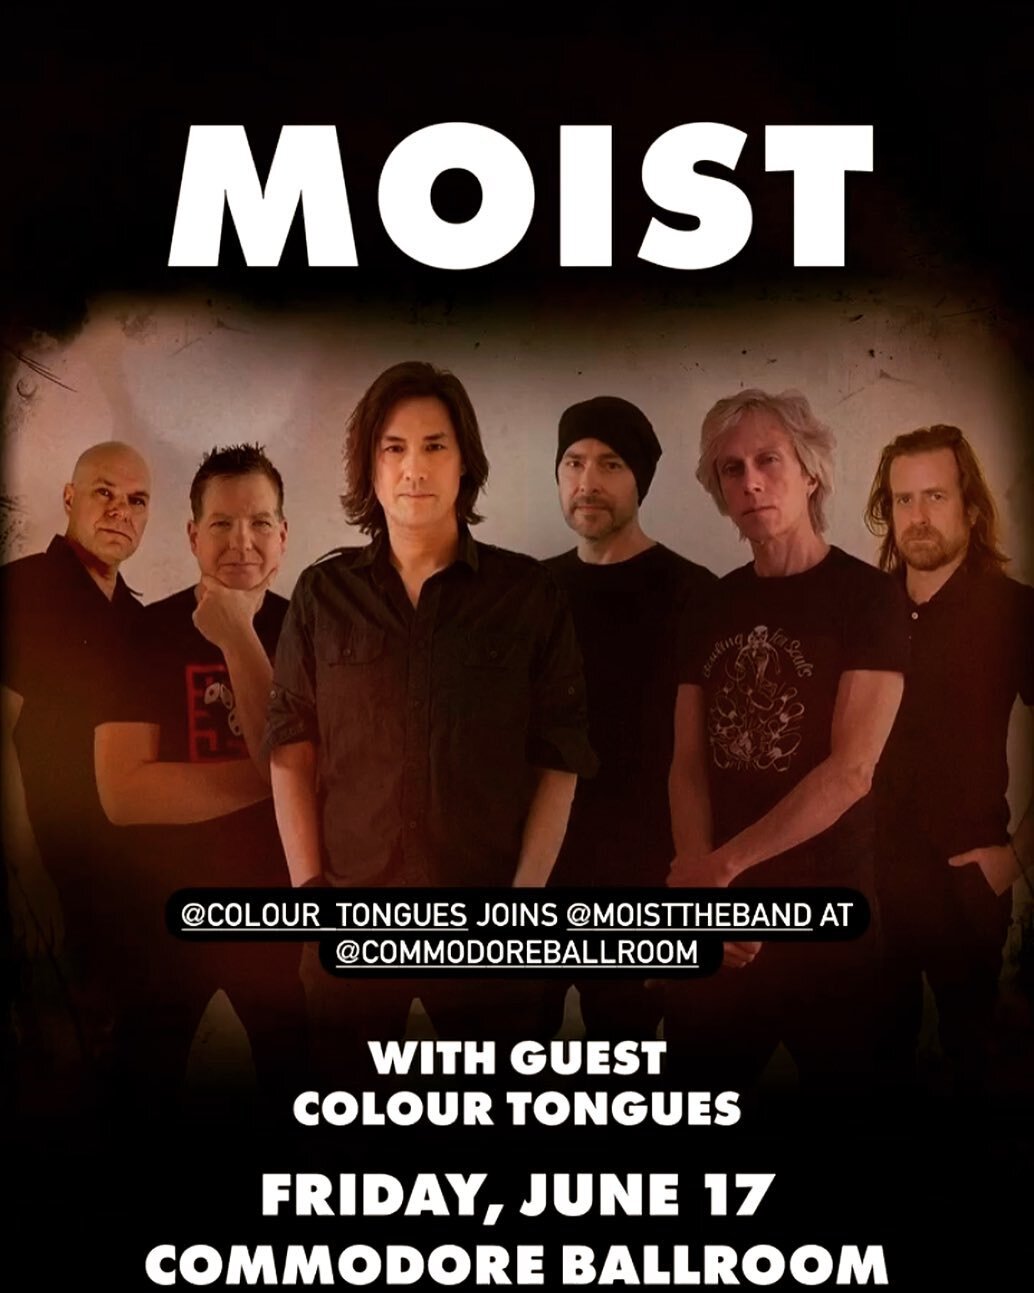 Unbelievably excited to announce that Colour Tongues will be opening for Canadian Alternative LEGENDS @moisttheband at the Commodore Ballroom Friday June 17th. 
These guys transformed the Canadian rock scene and their new album is PHENOMENAL!
Come se